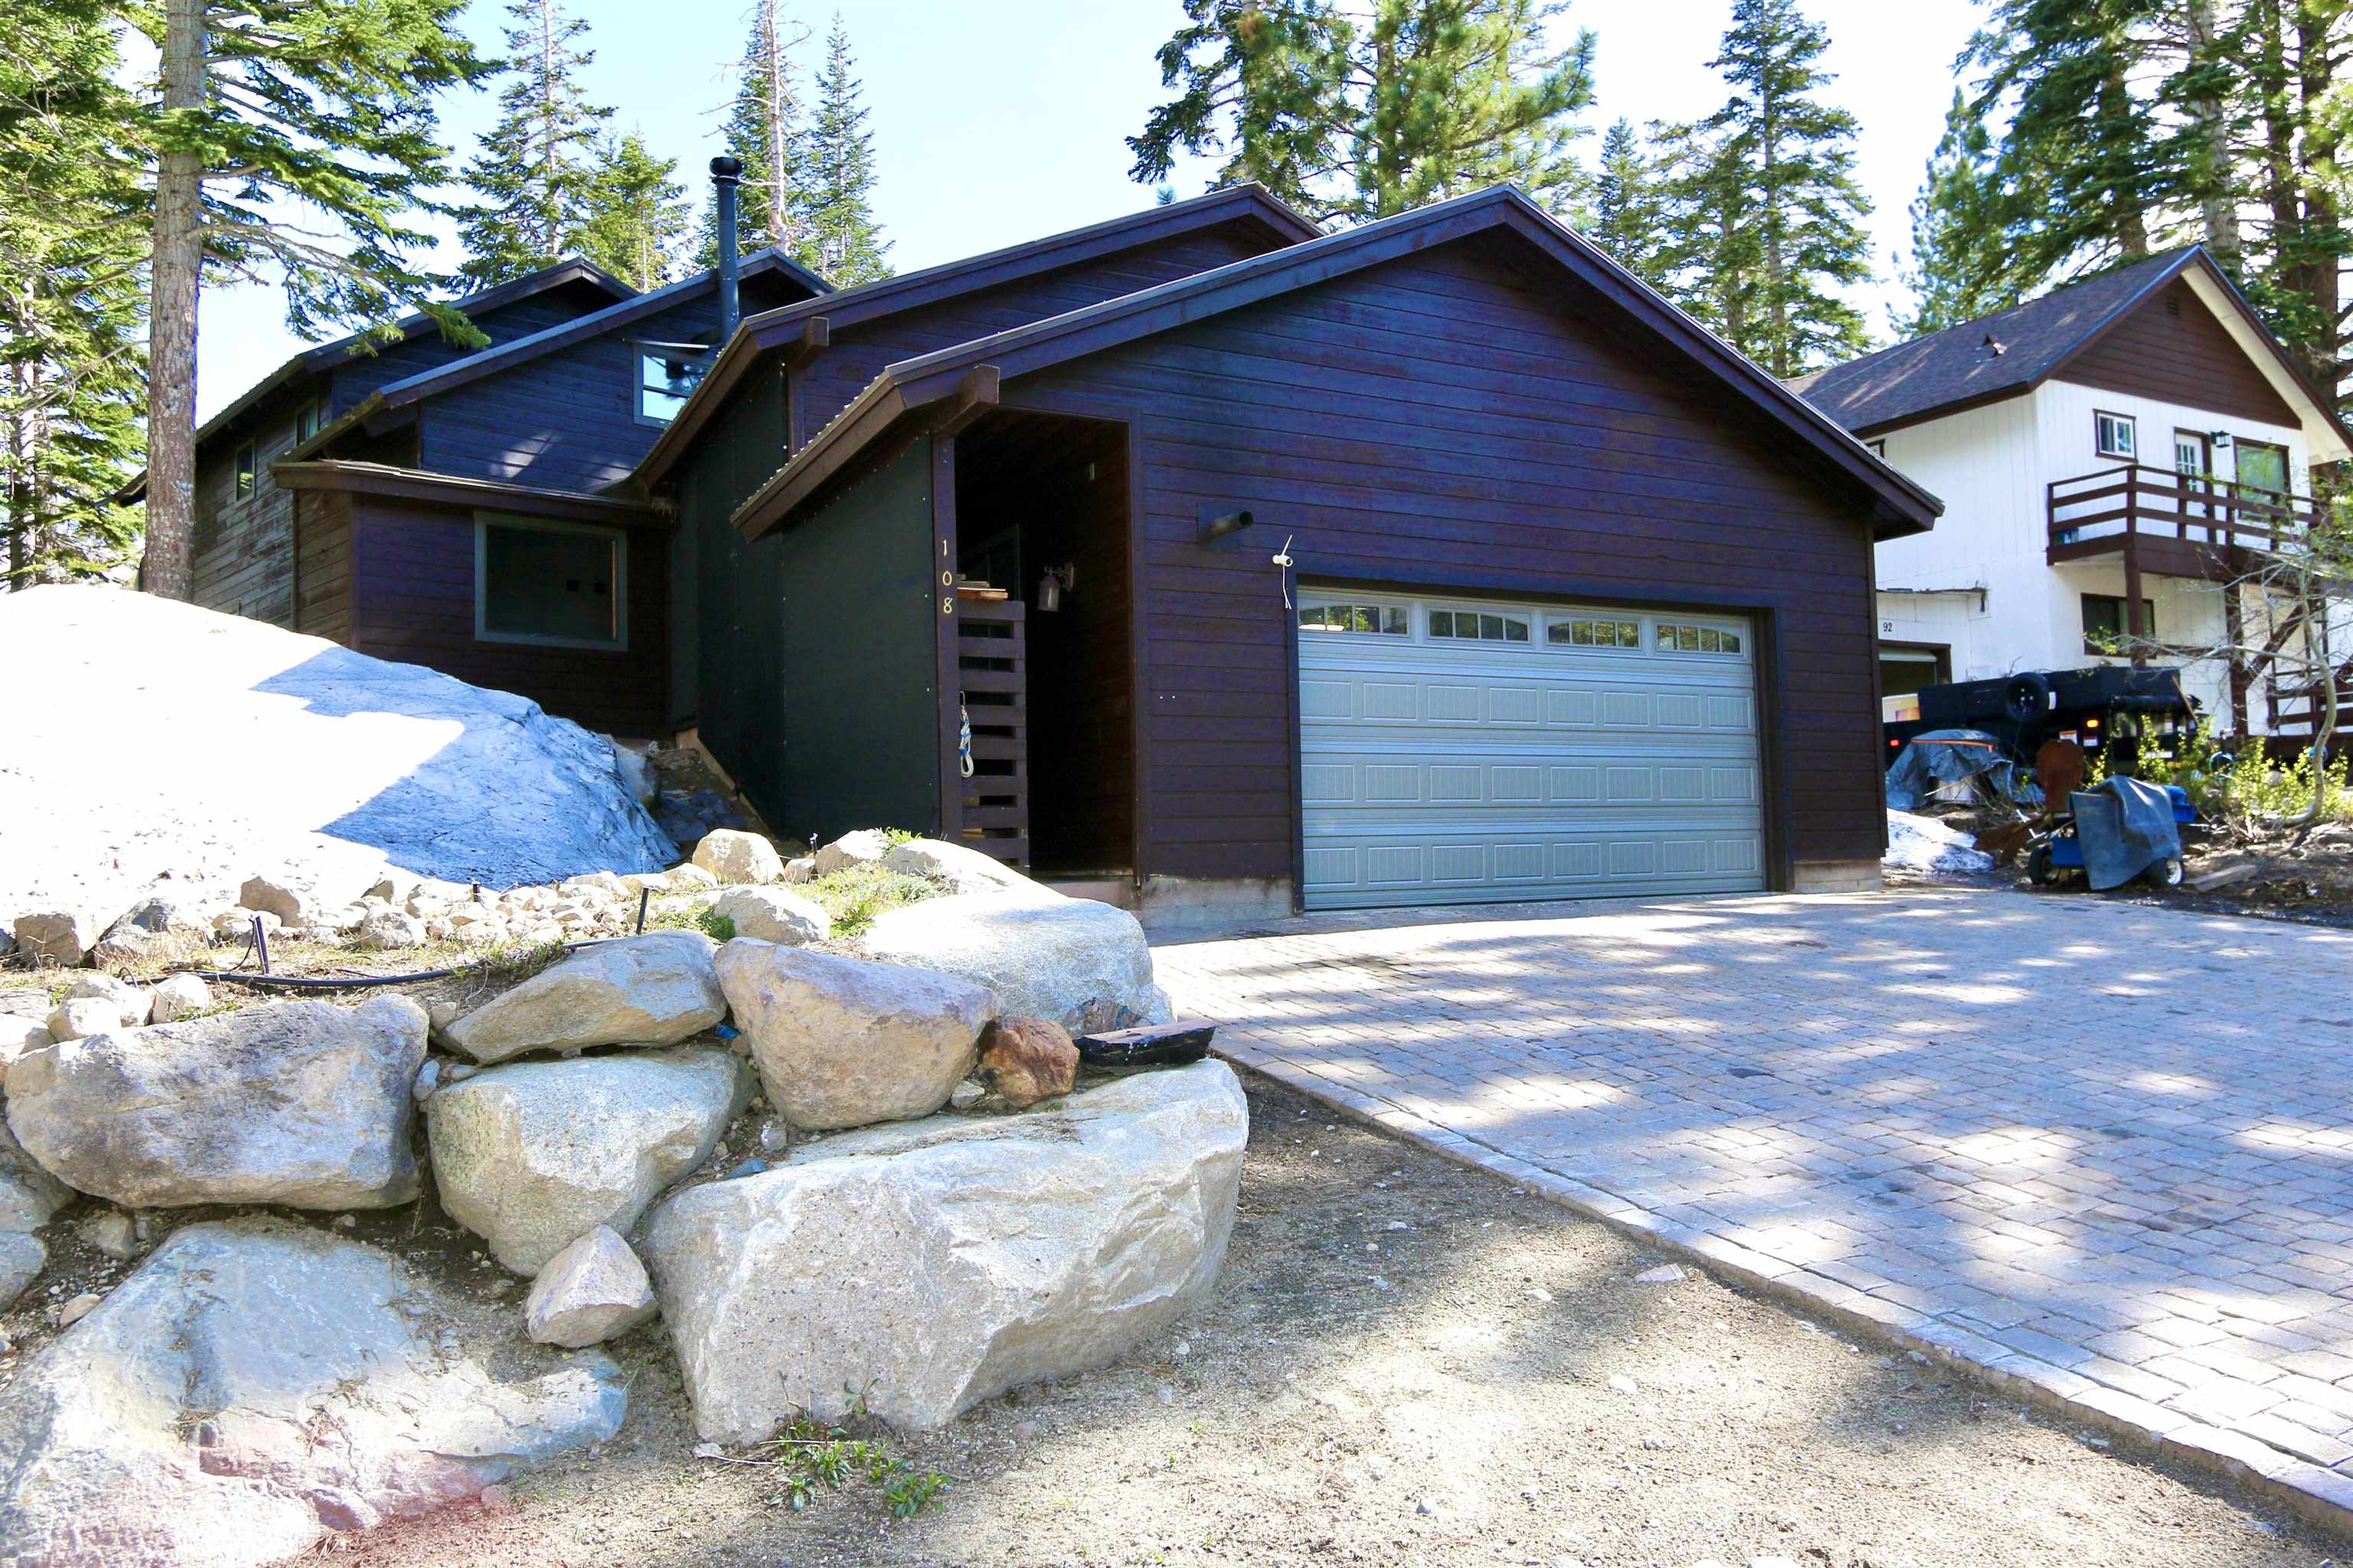 Classic 1969 Mammoth home originally built by Ross Mather. Prime and private Slopes subdivision location with easy access to the Village and Canyon Lodge. Beautiful Sherwin view from great room. Large added-on garage with extra height for vehicle lift or room for living space or ADU. Large utility mudroom serves front door, garage and spacious laundry room. Remodeled kitchen and baths including plenty of stone and concrete countertops. Six-burner commercial cooktop. Wood floors and wood doors. Forced air heat in downstairs, freestanding wood burning stove in great room and pellet stove in garage. Fully fenced yard great for kids, dogs, or?? Metal roof. Large paver driveway. Separate spa shed for privacy. Extra glassed-in storage room with potential greenhouse, work-out room, or?? All hard copper plumbing. This home offers fantastic utility in this mountain environment. Very minor damage through the winter of 2023. Check out the video tour.